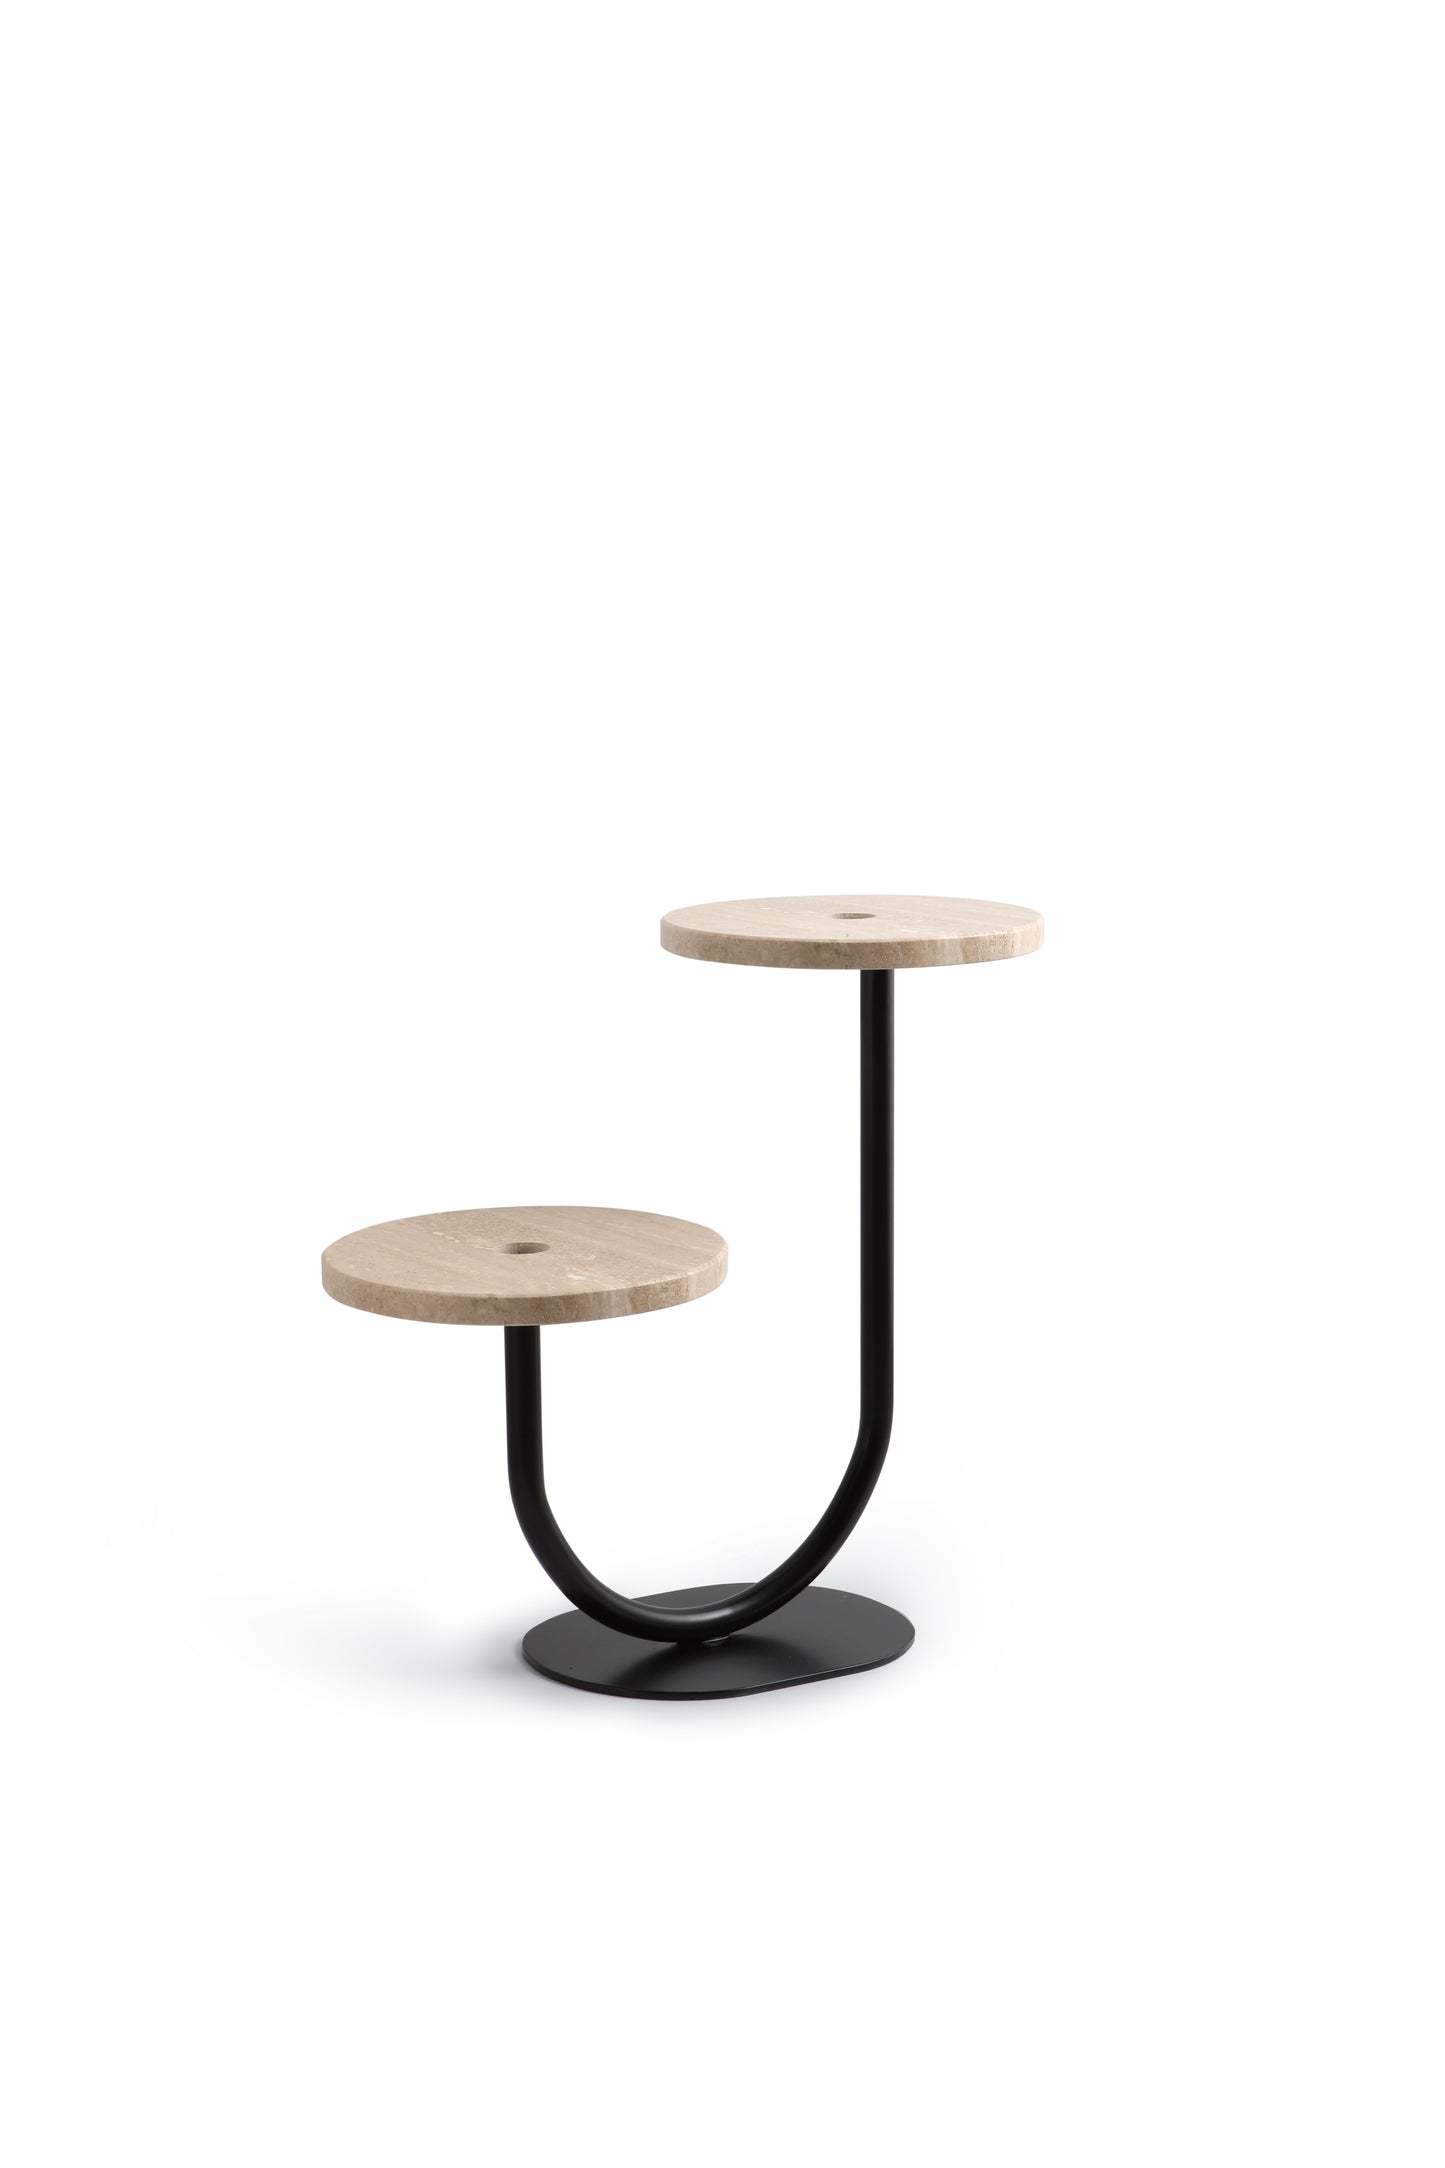 METAL STRUCTURE WITH MARBLE TOP STOOL